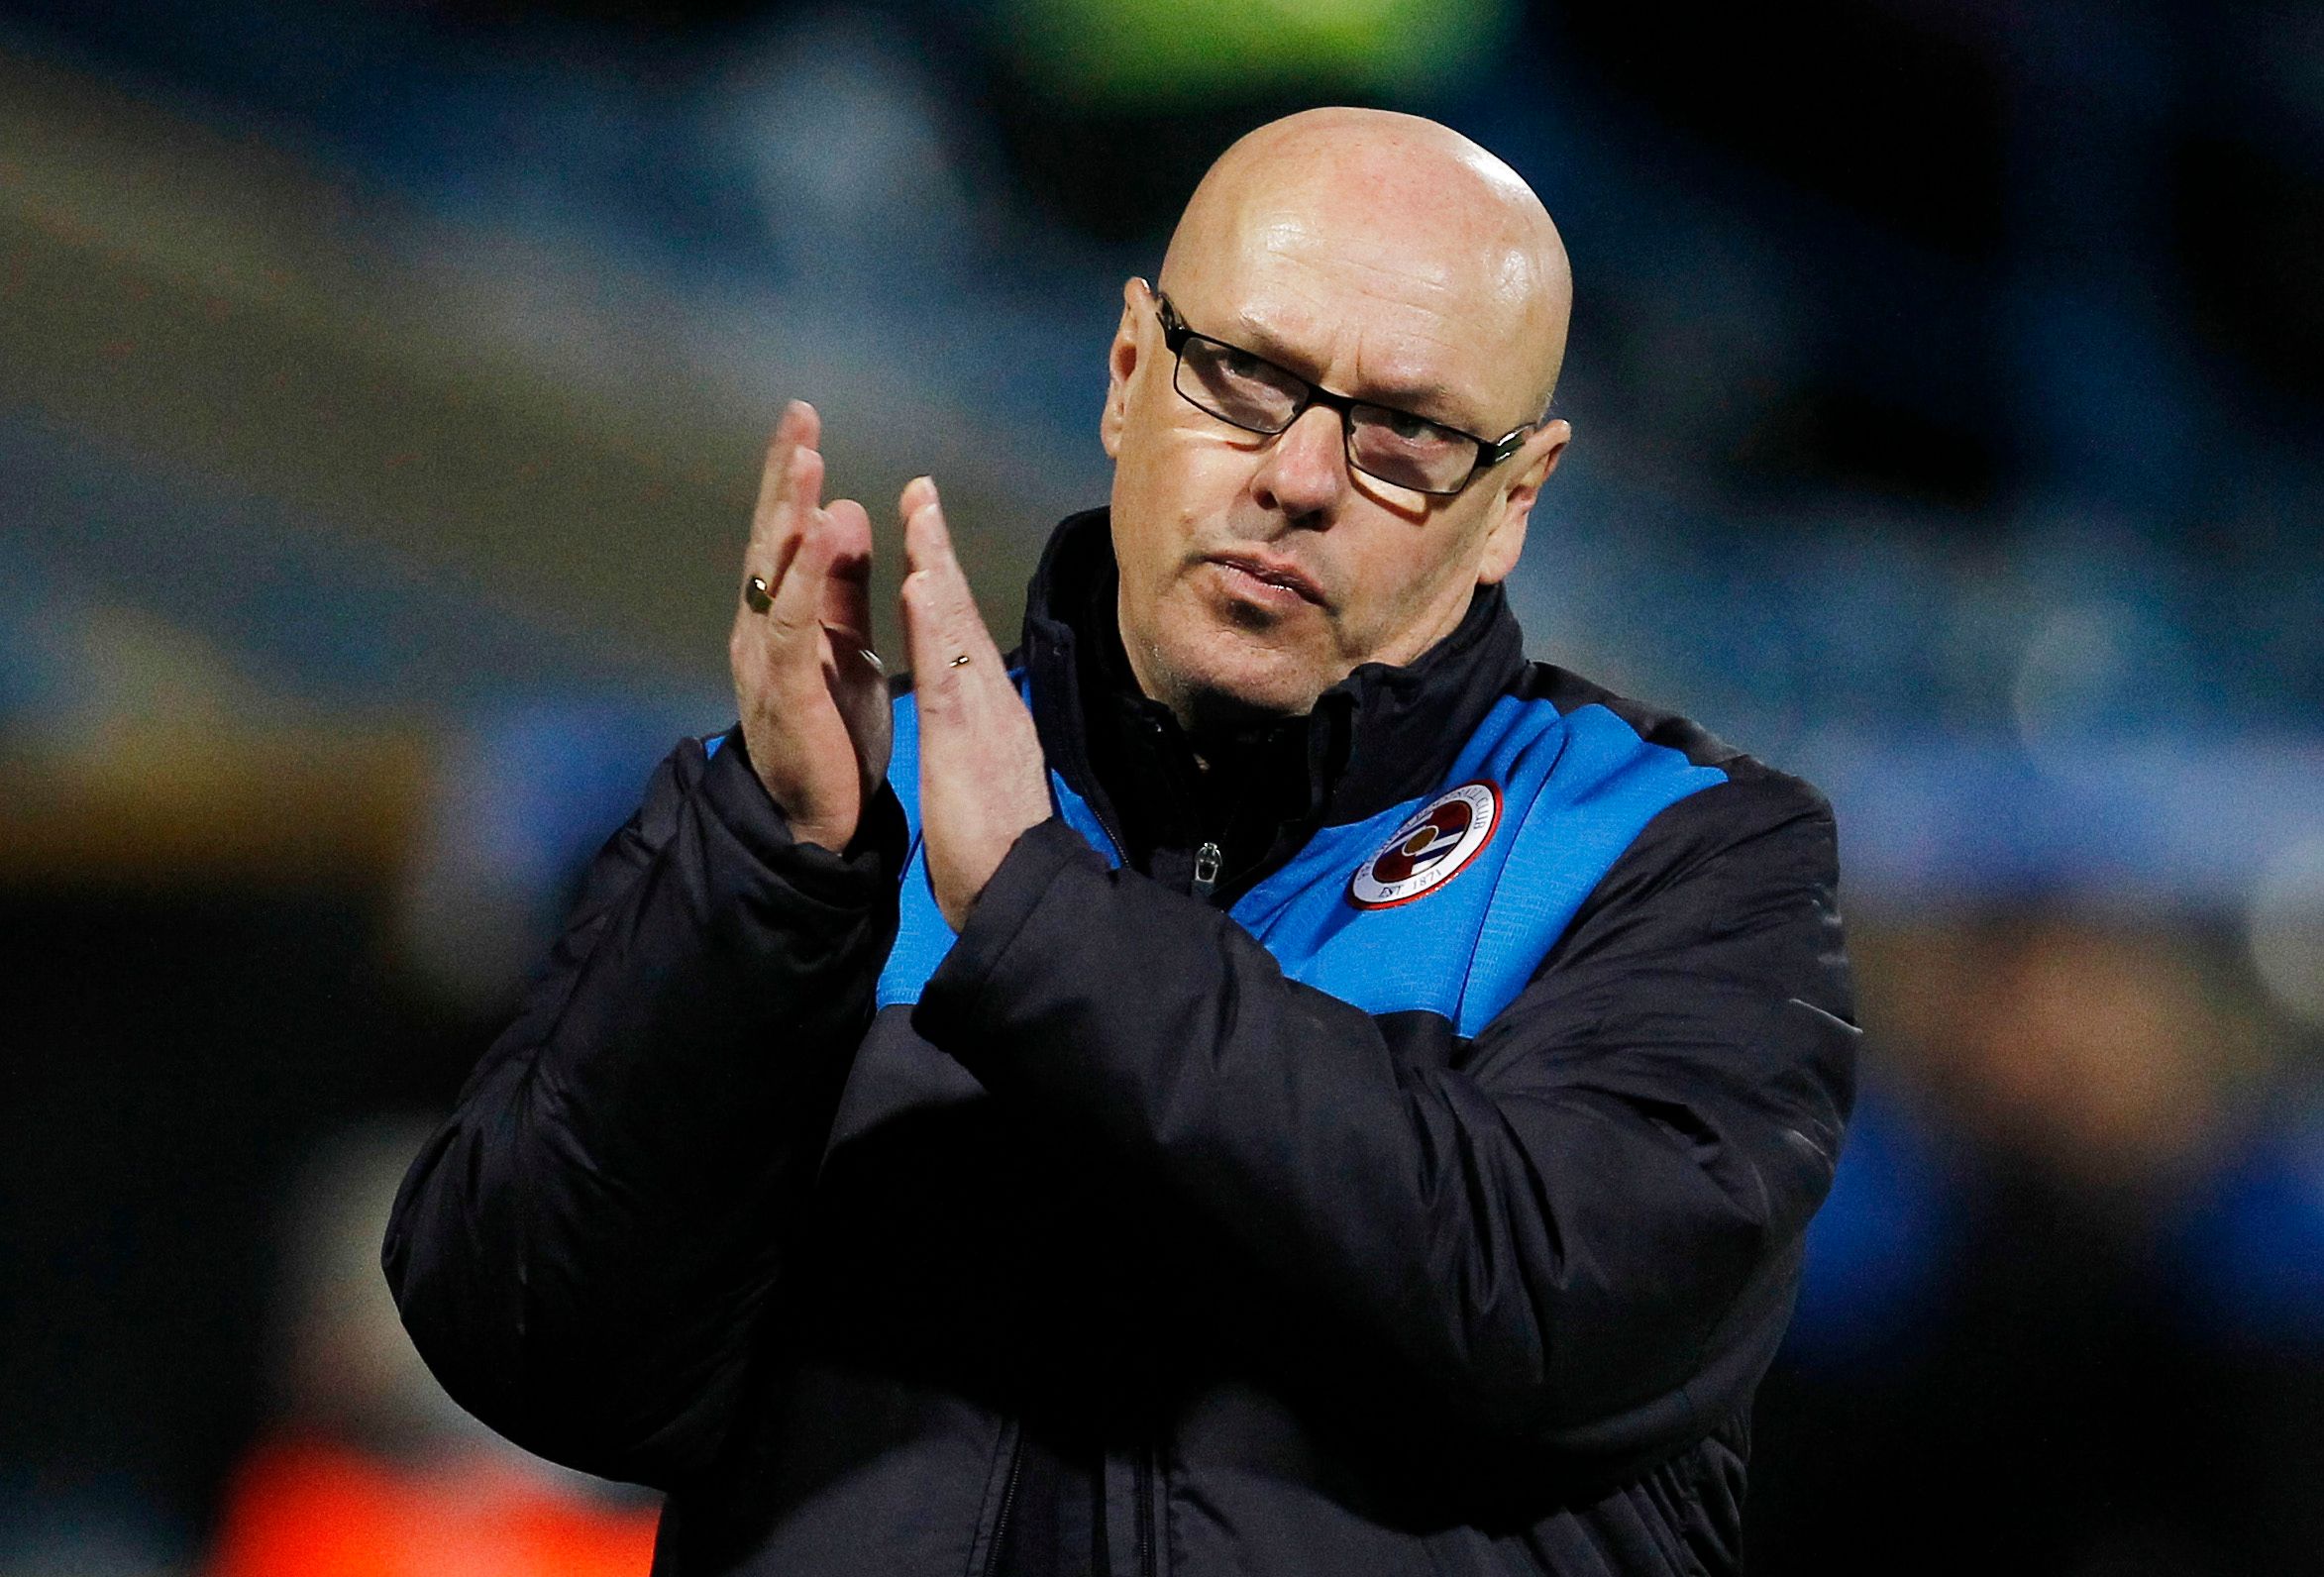 Football Soccer - Huddersfield Town v Reading - Sky Bet Football League Championship - John Smith's Stadium - 8/3/16 
Reading Manager Brian McDermott applauds the fans after the final whistle 
Mandatory Credit: Action Images / Craig Brough 
Livepic 
EDITORIAL USE ONLY. No use with unauthorized audio, video, data, fixture lists, club/league logos or 